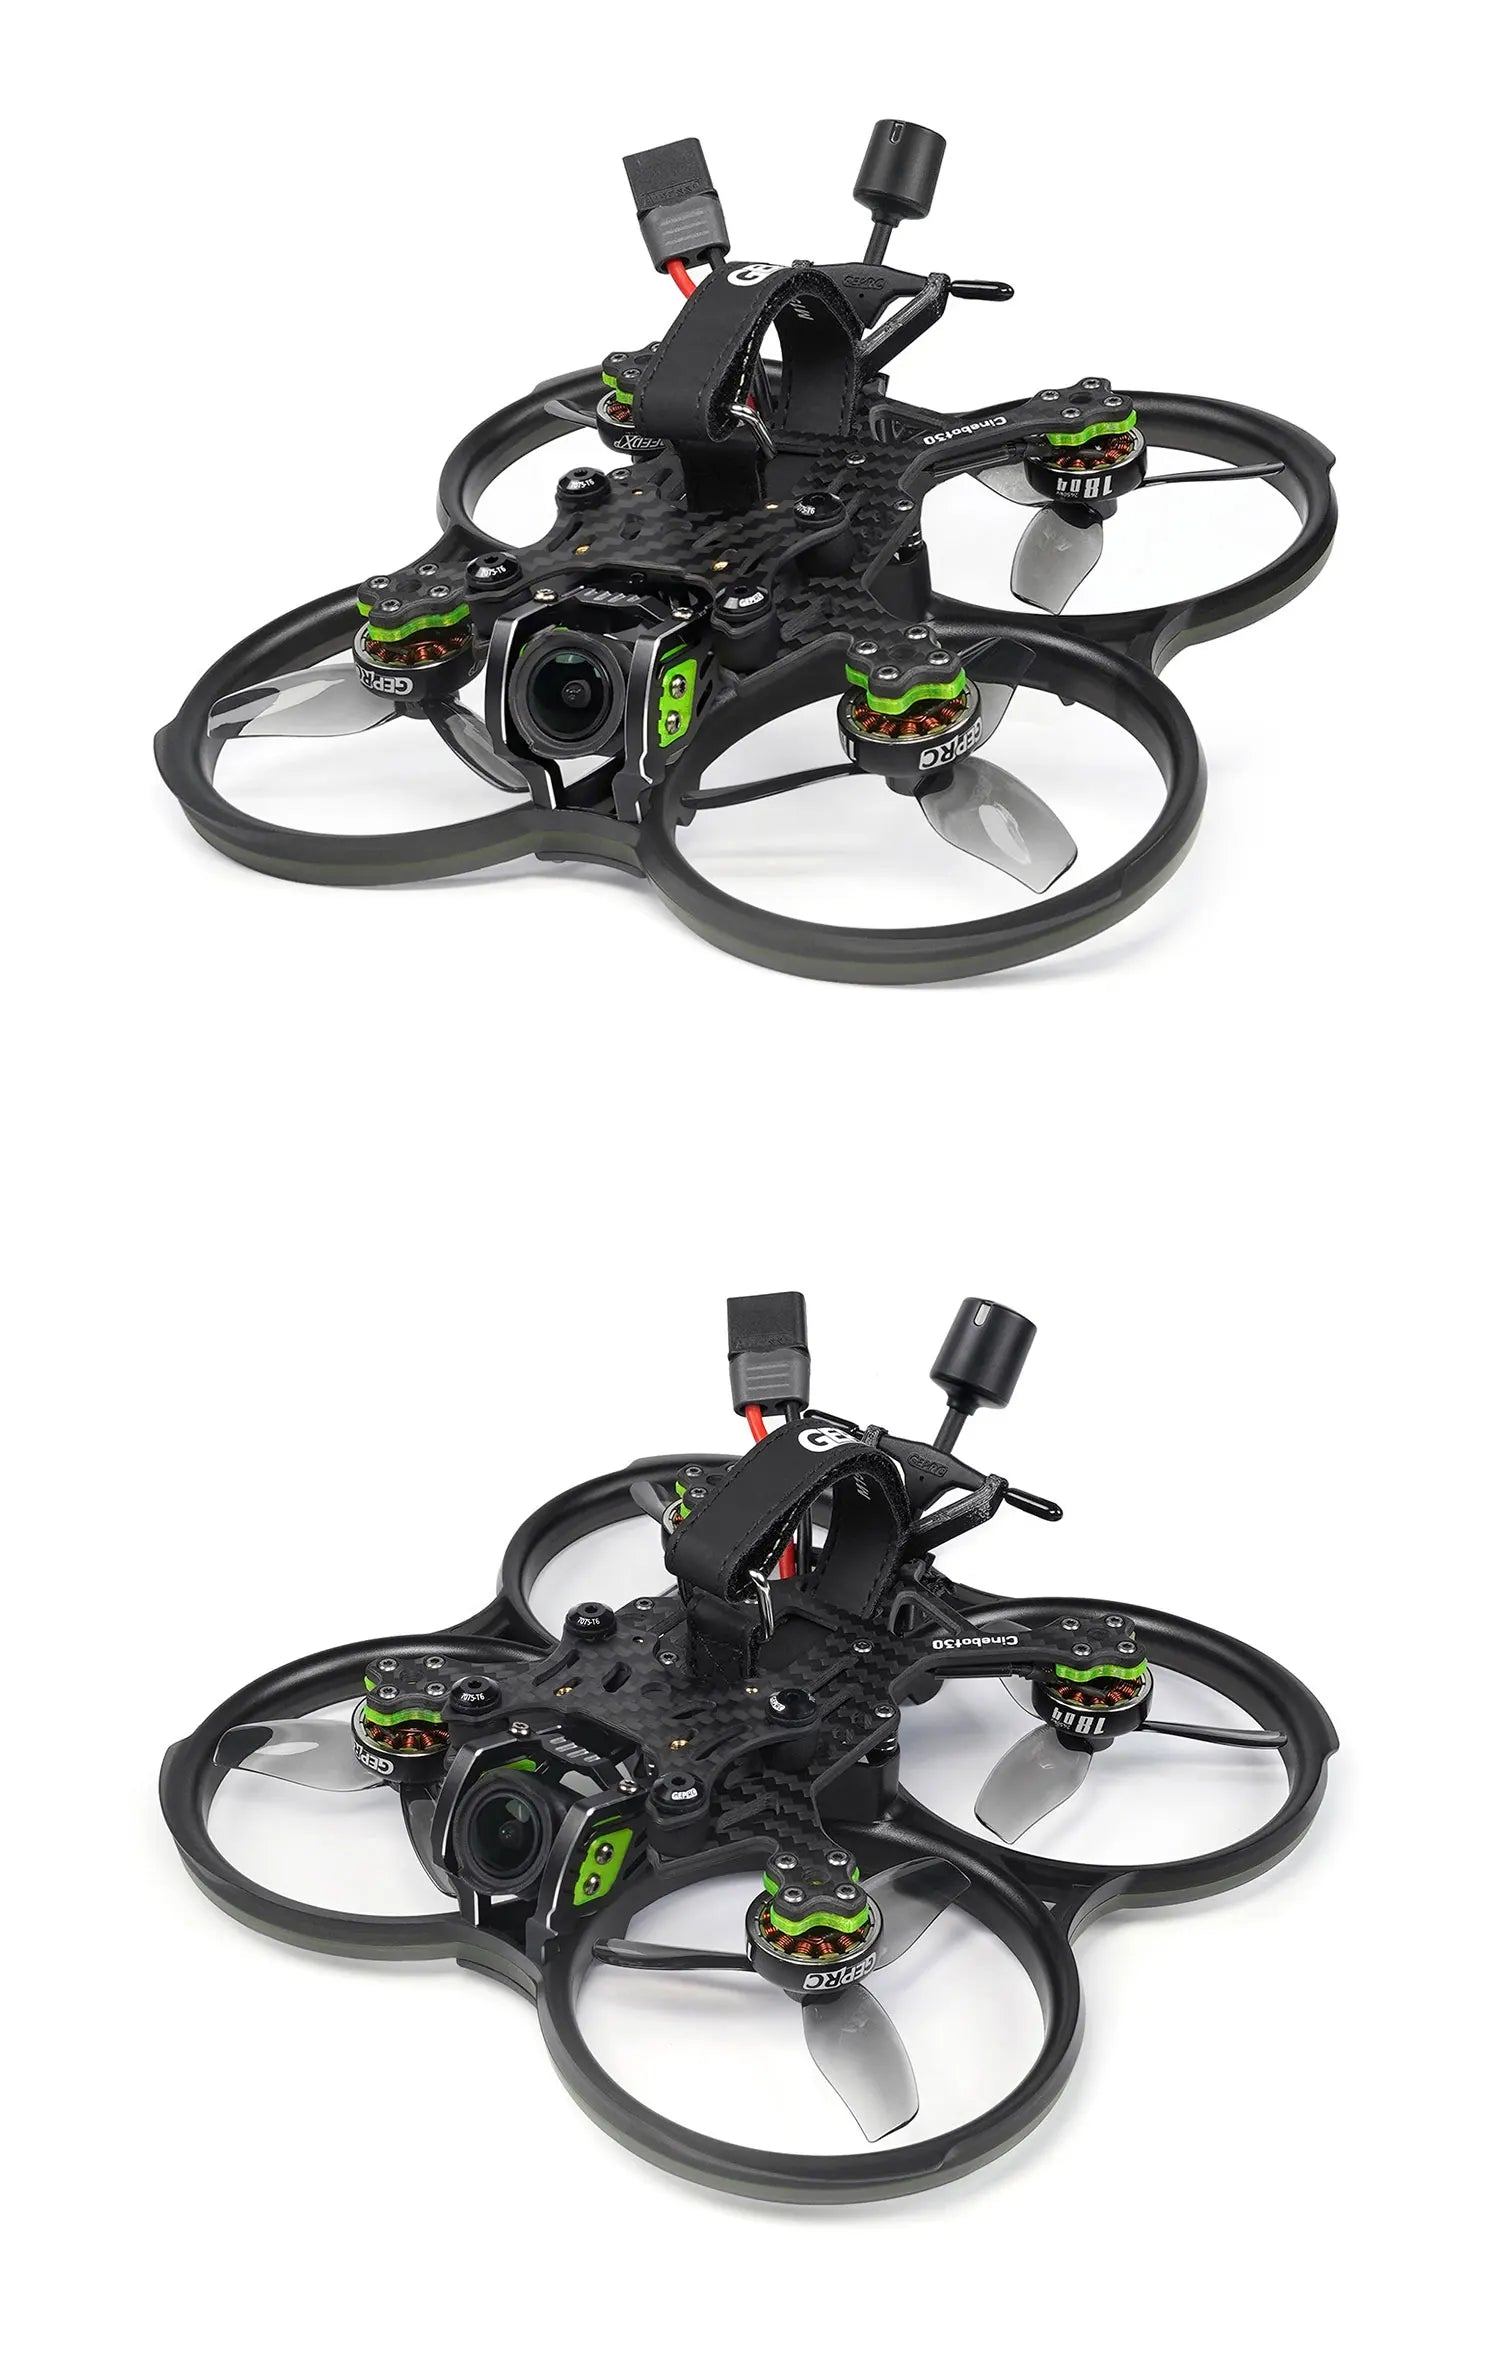 GEPRC Cinebot30 FPV Drone, the image is stable and clear, and it's easy to film